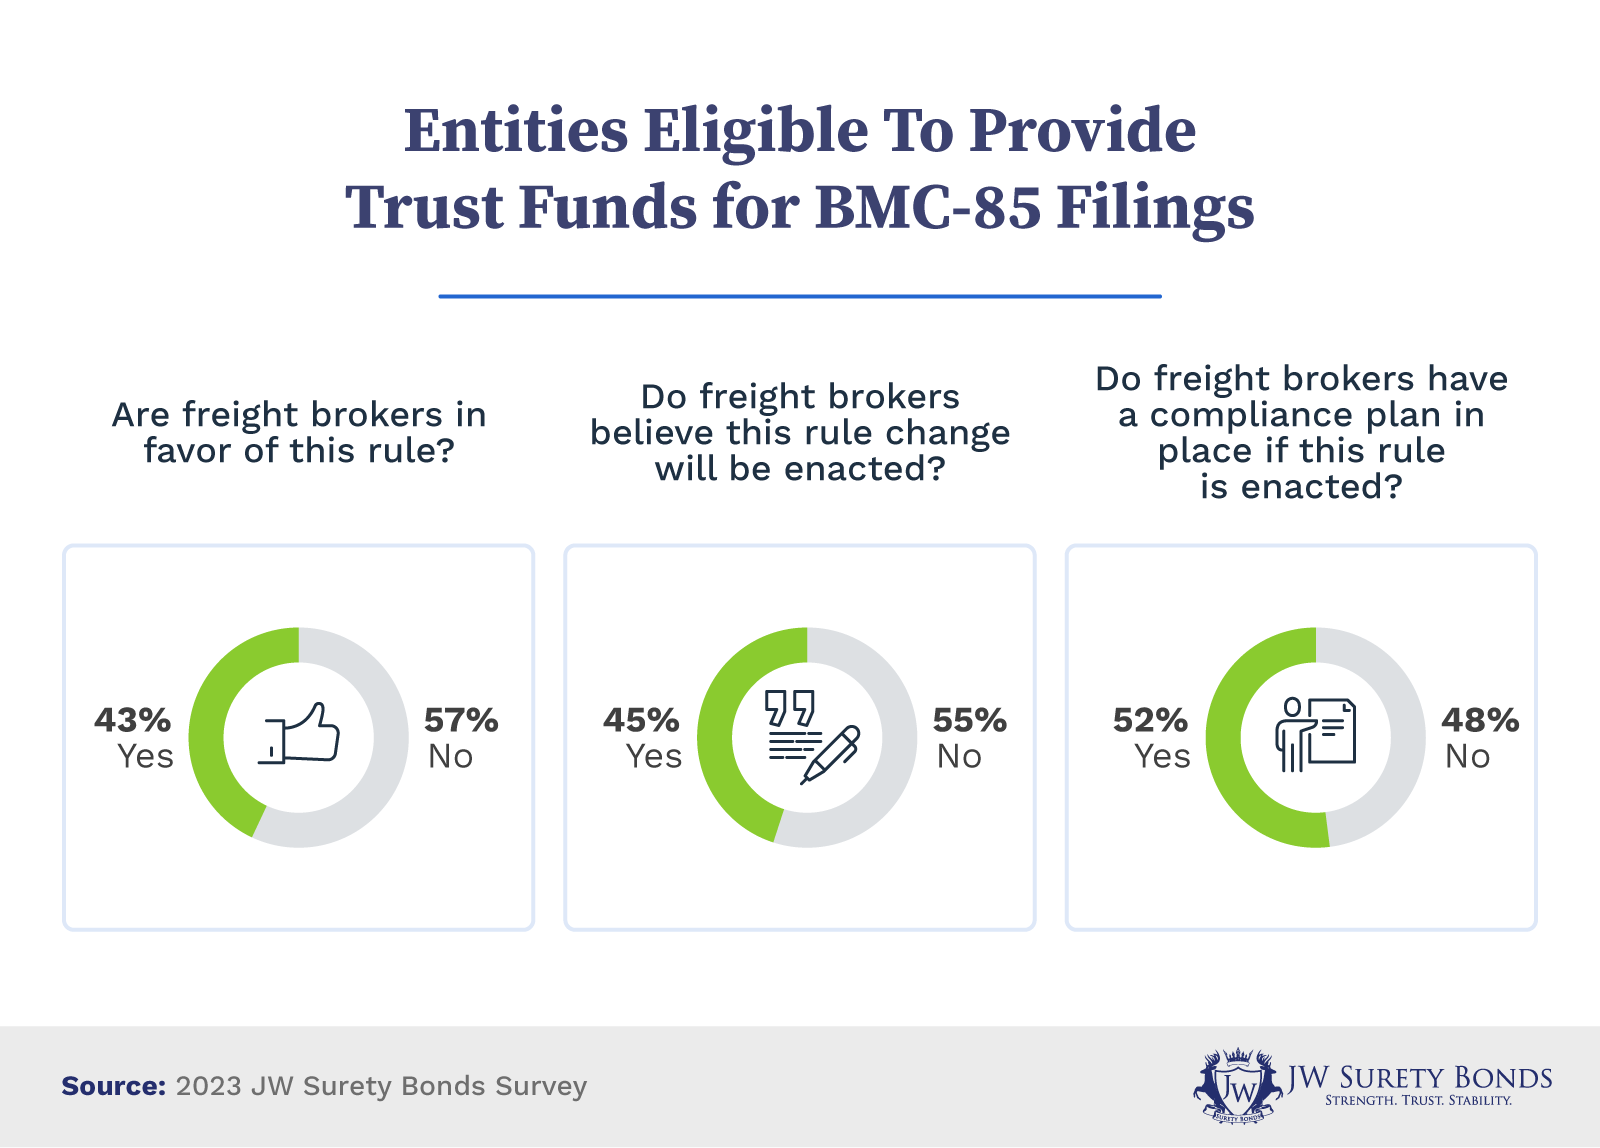 Entities Eligible to Provide Trust Funds for BMC-85 Filings